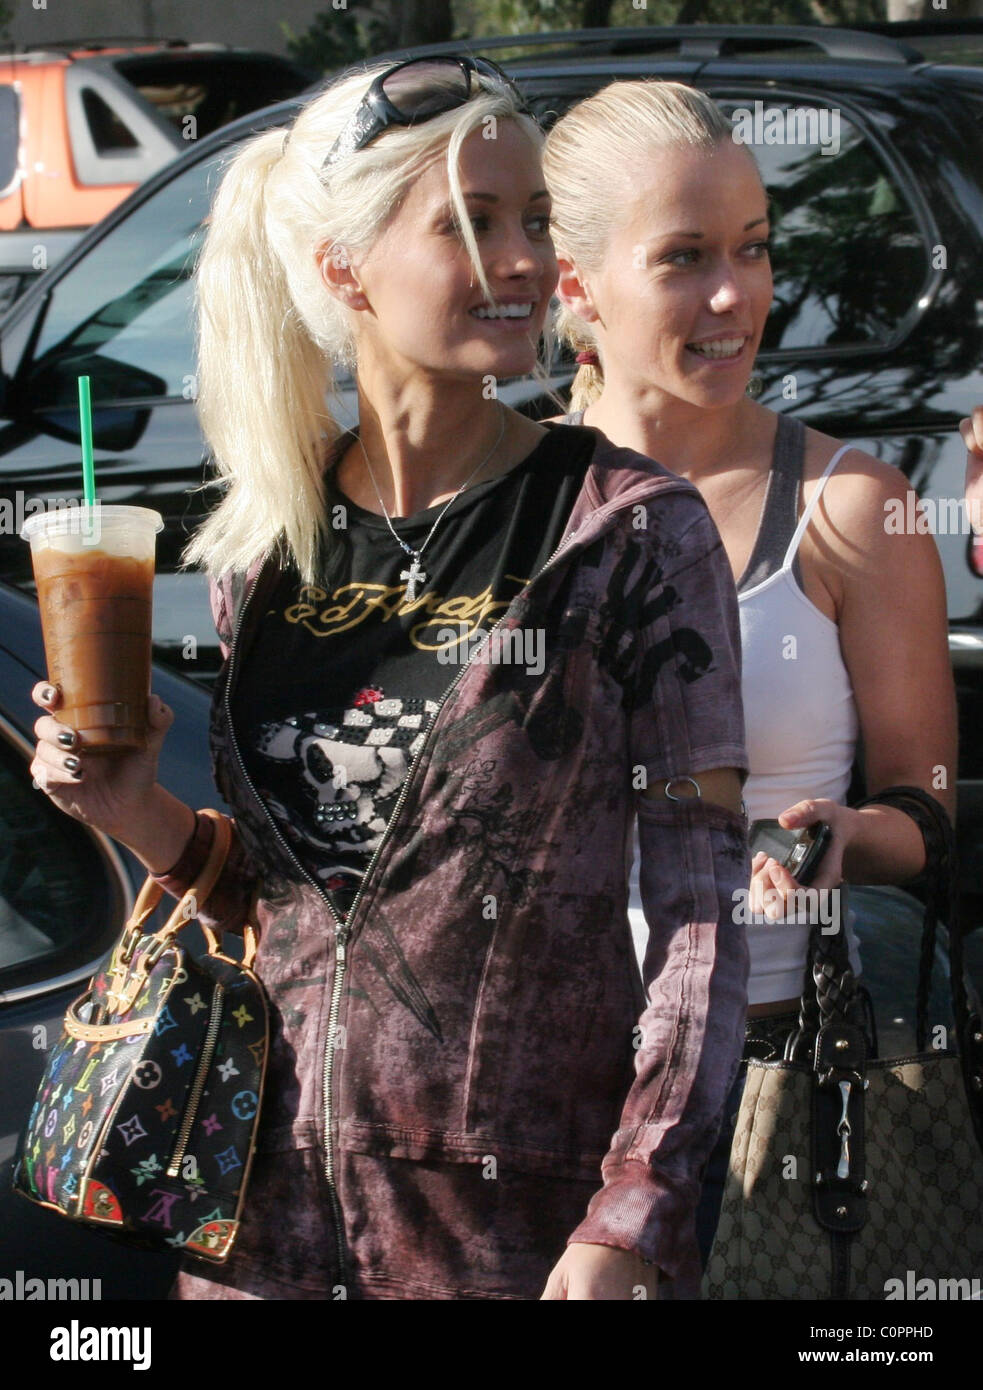 Holly Madison at Le Clafoutis Restaurant in West Hollywood April